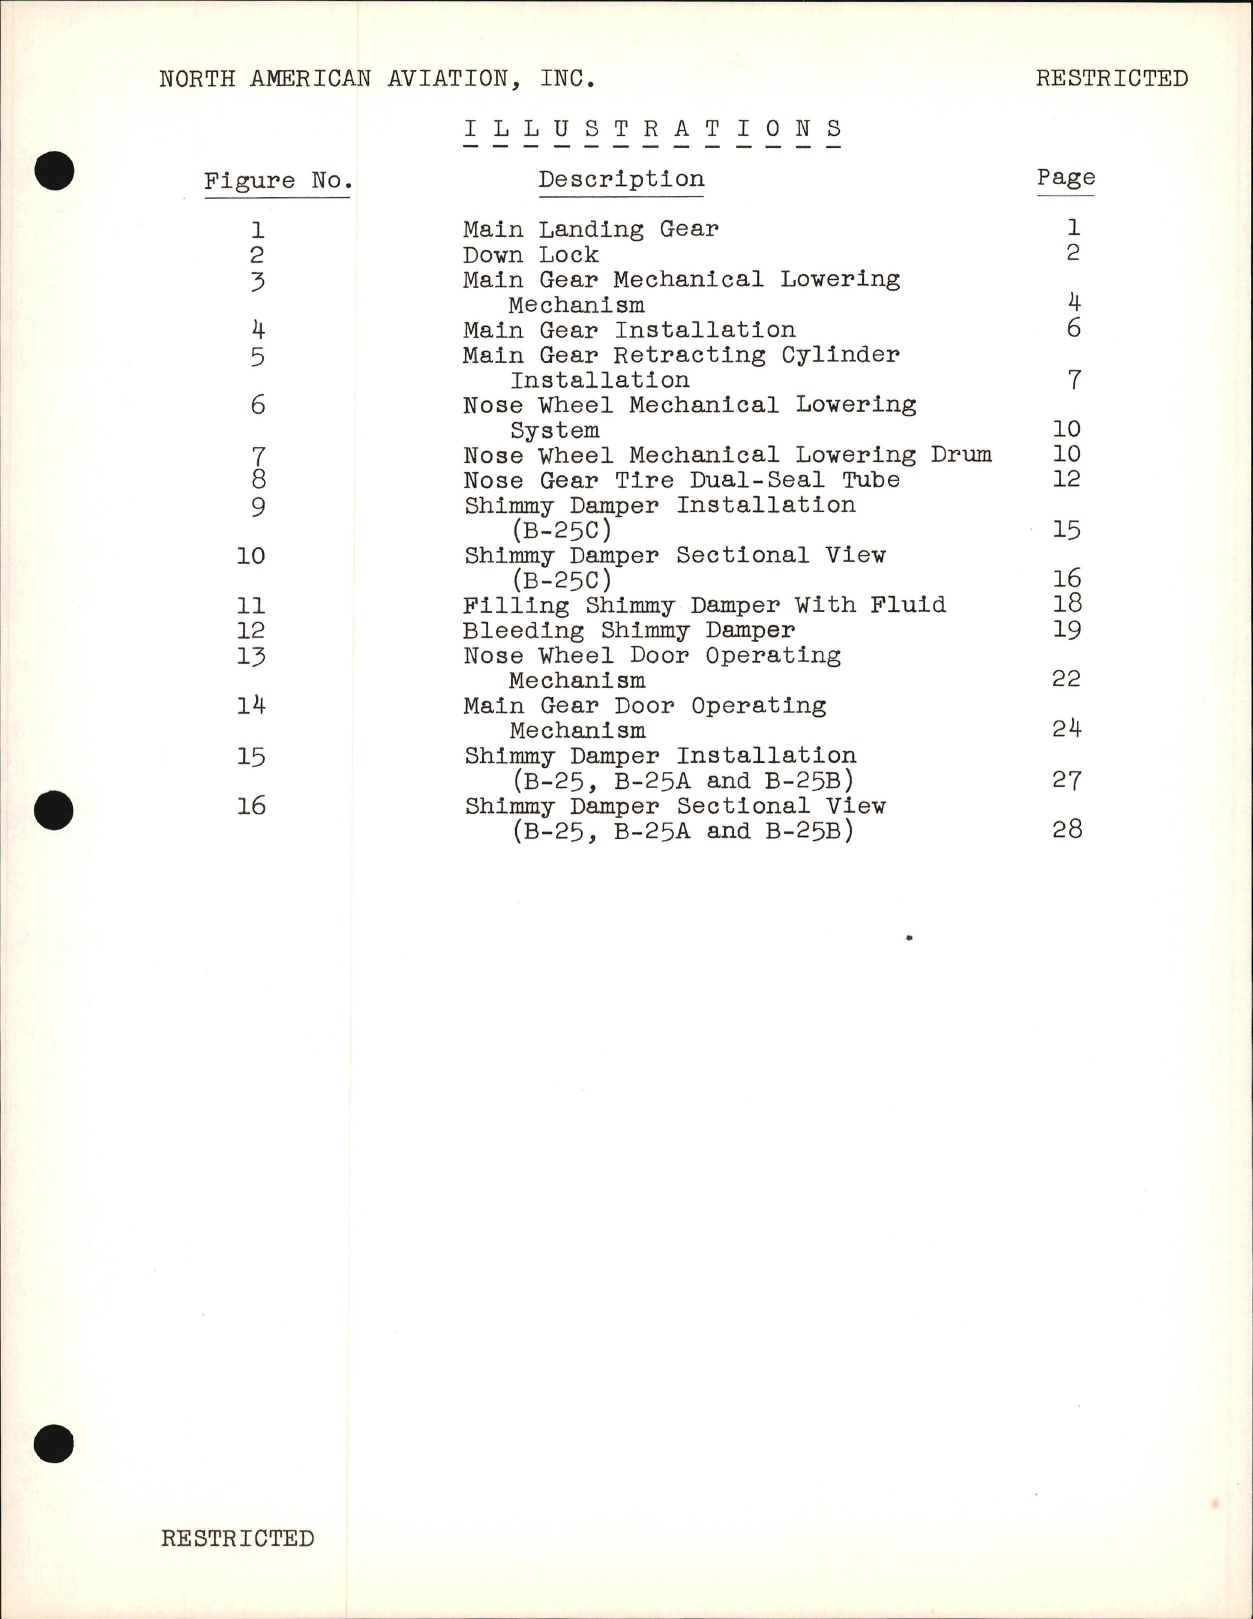 Sample page 5 from AirCorps Library document: Service School Lectures - Landing Gear